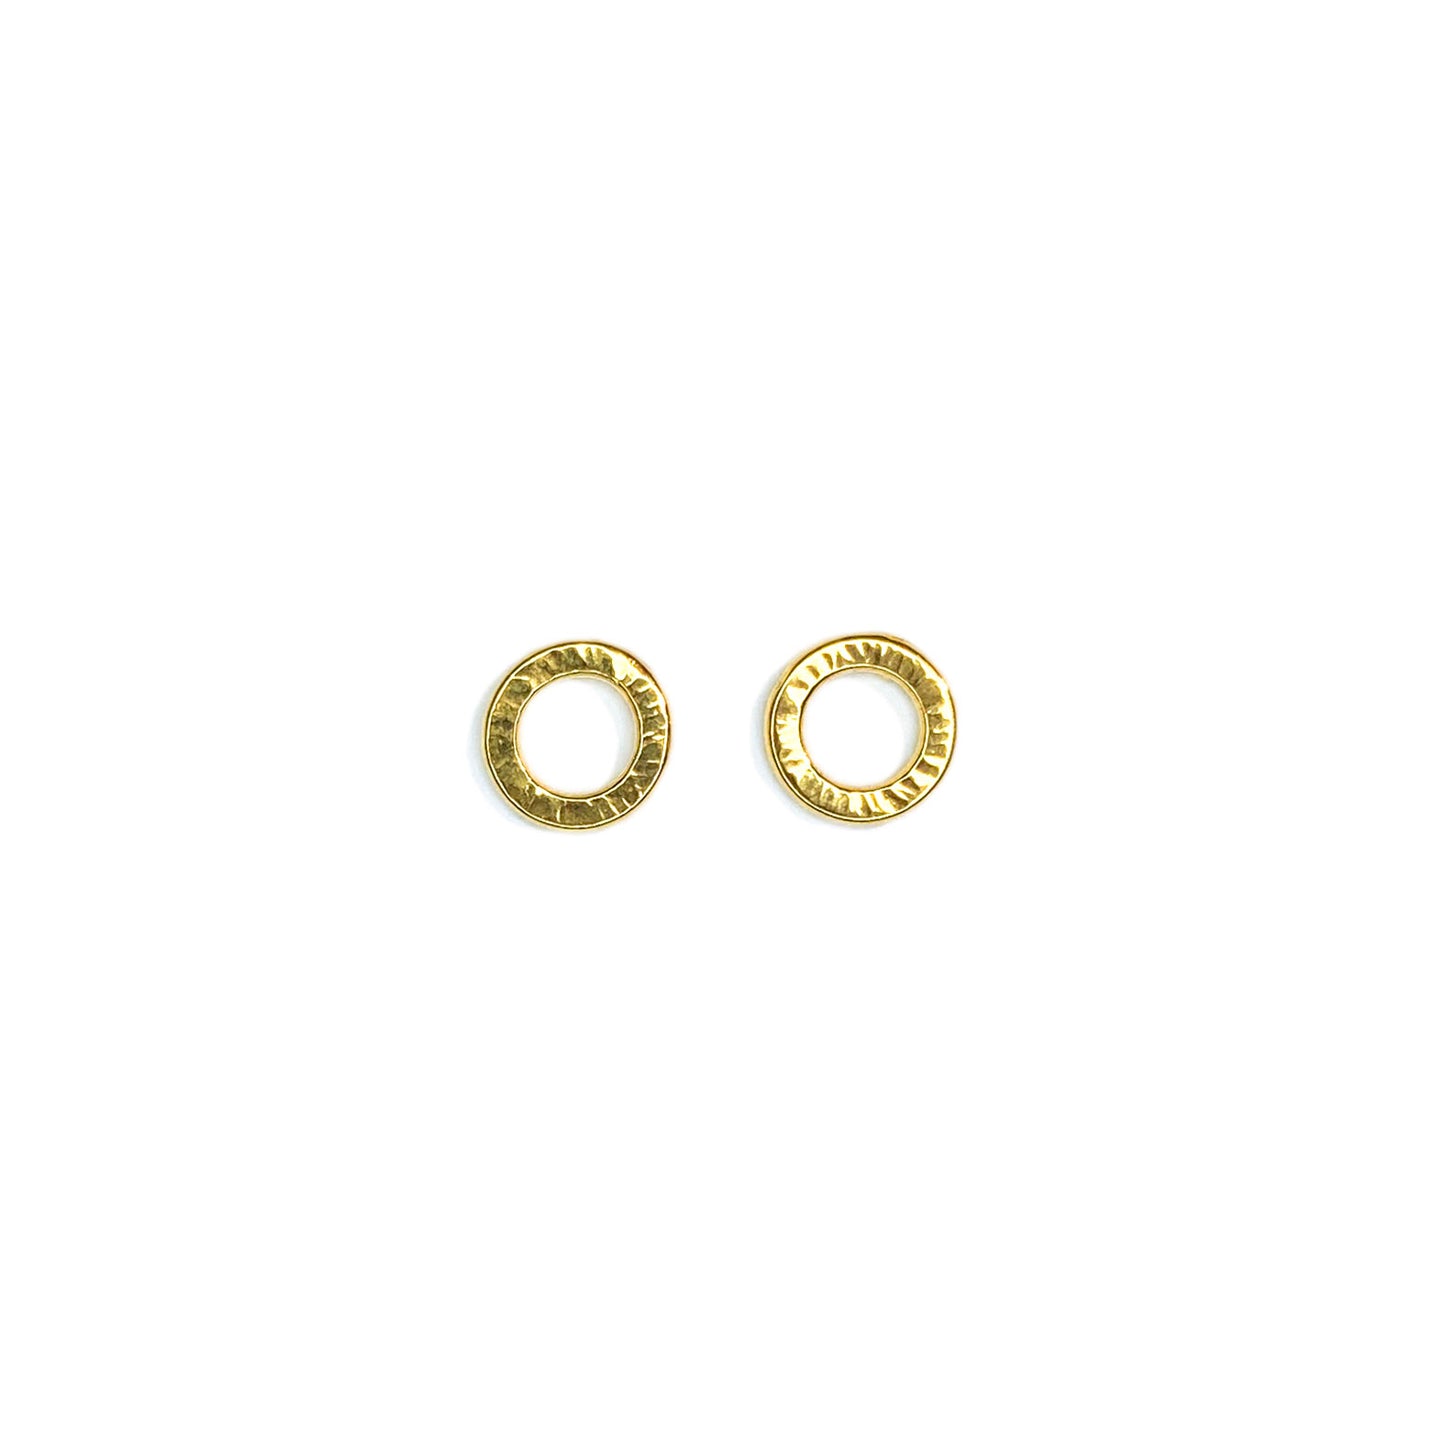 Open circle studs with texture radiating from the center on a white background